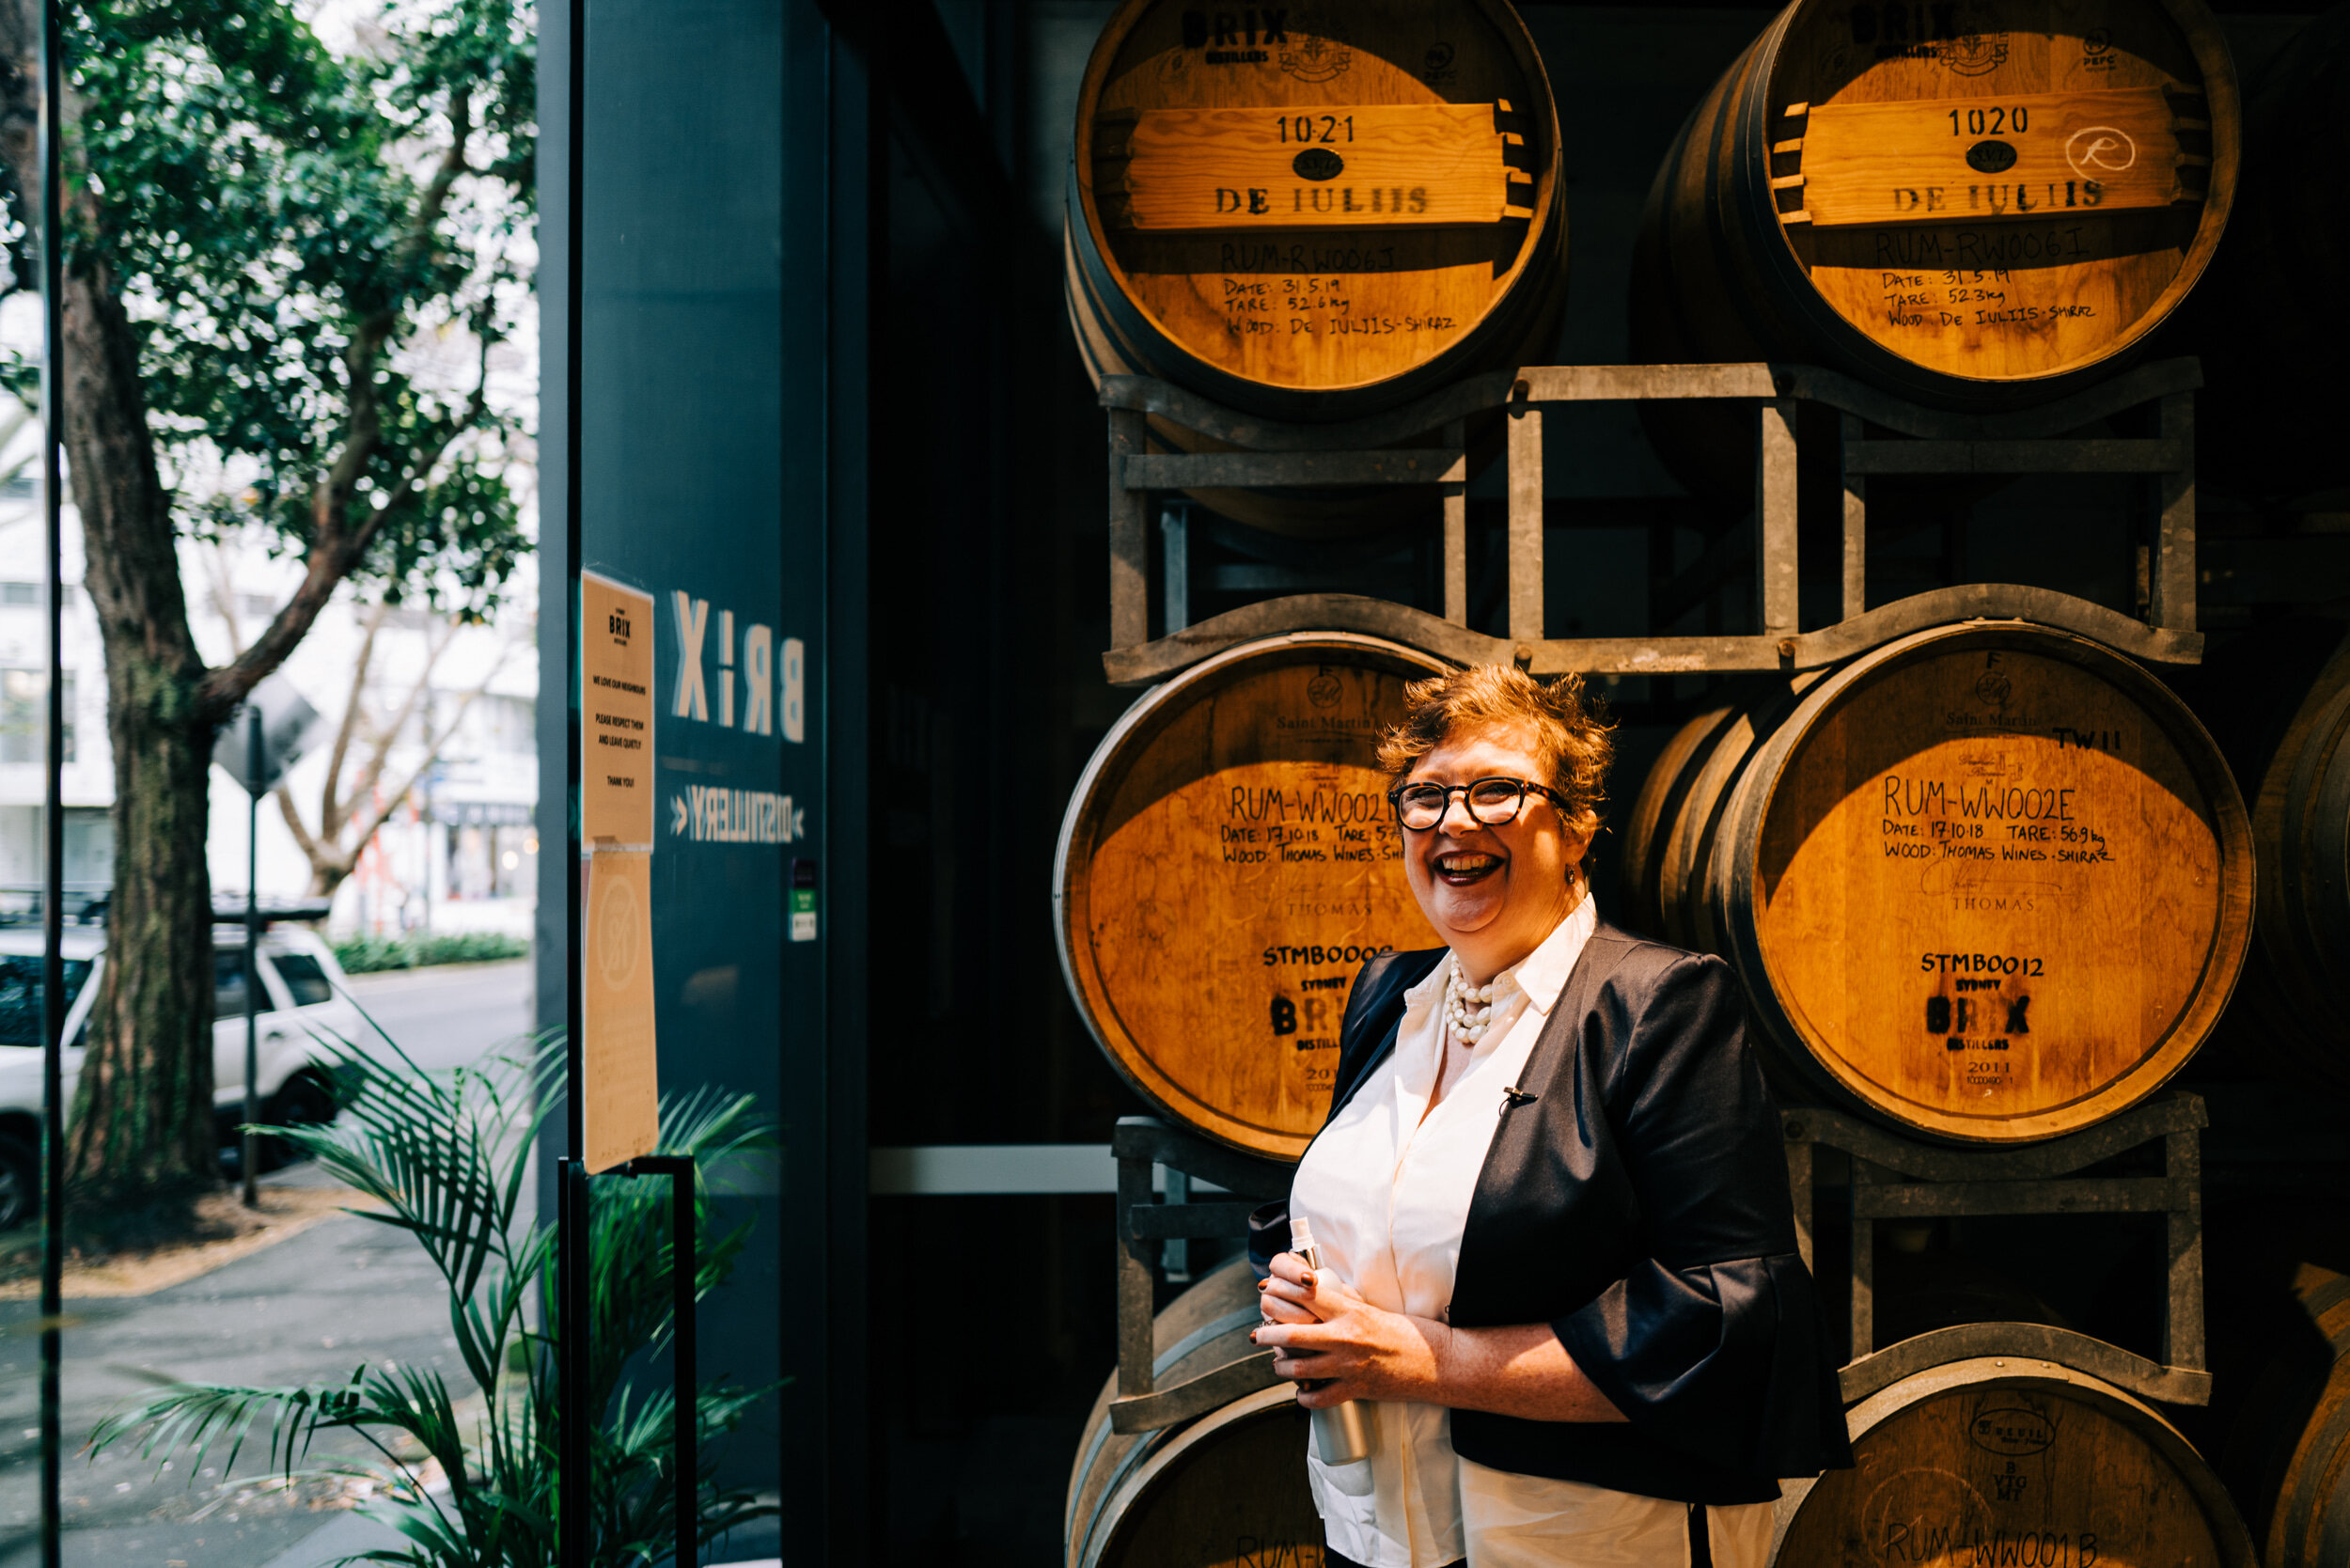 Maree+Sheehan+sydney+connection+Brix Distillers+Surry+Hills